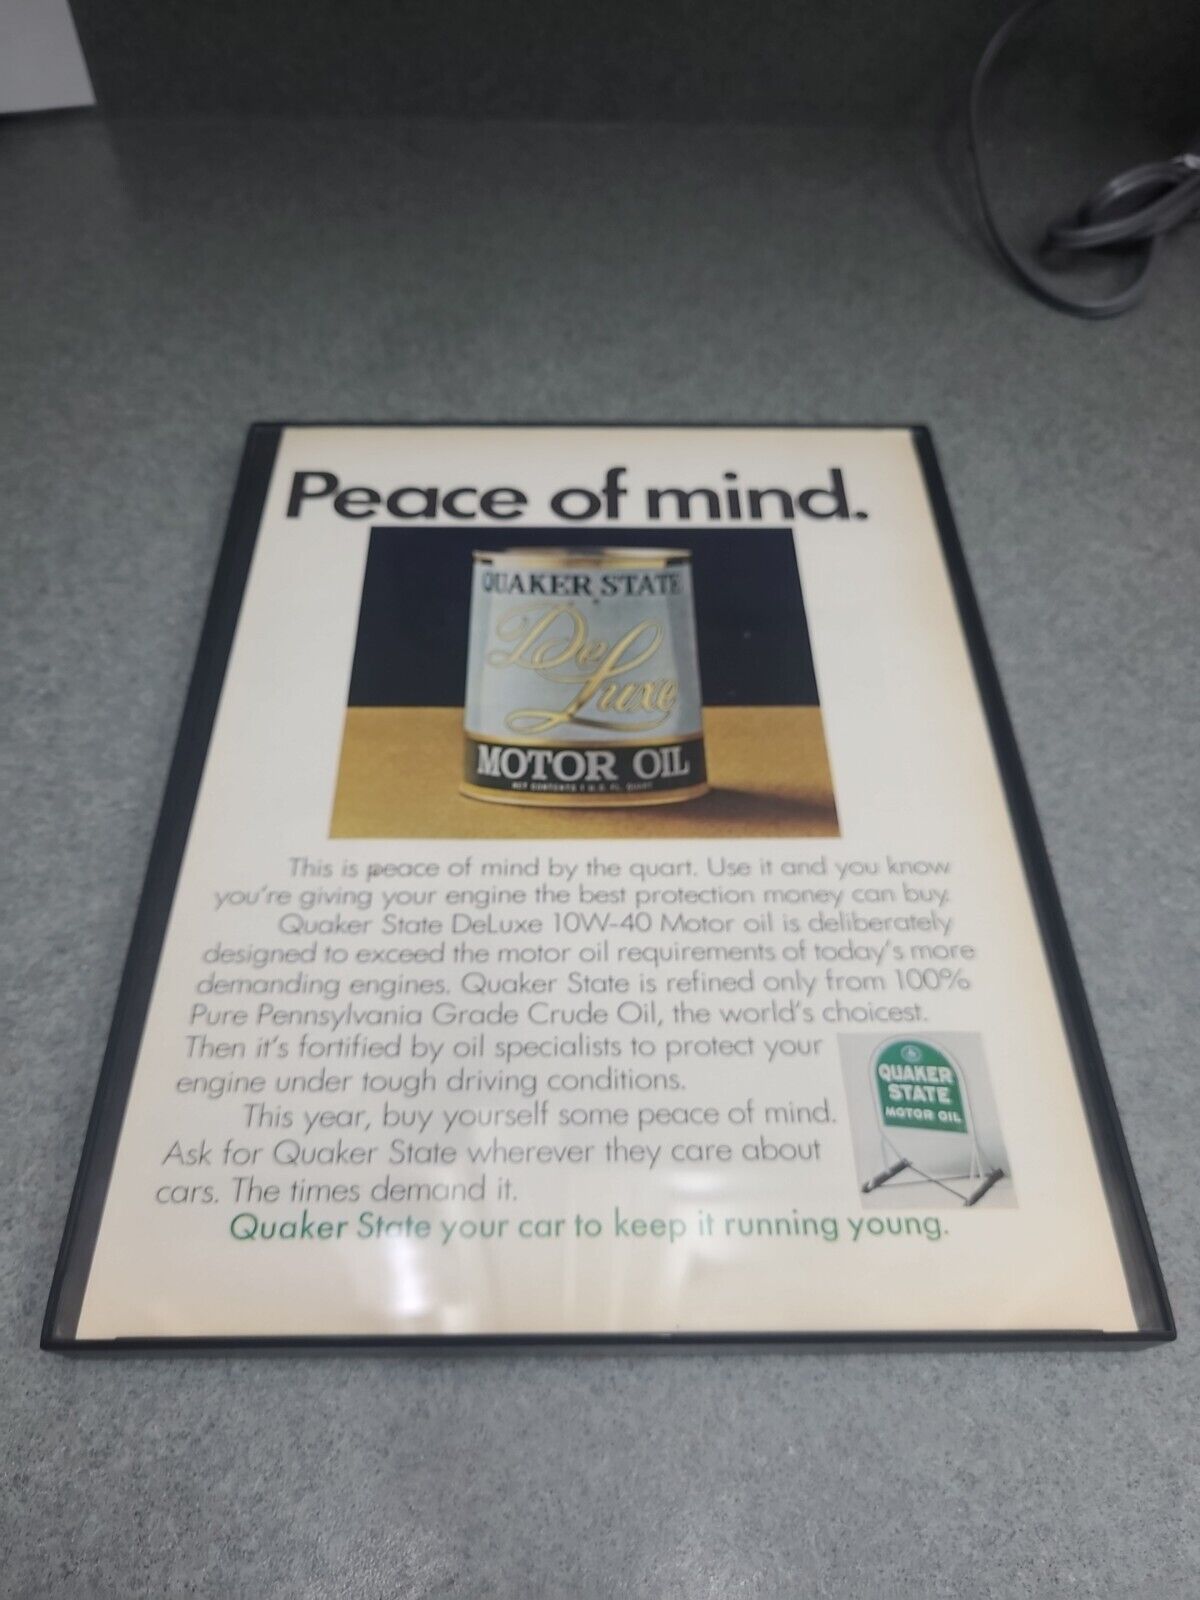 1972 Vintage Print Ad Quaker State Deluxe Motor Oil Peace of Mind Framed 8.5x11 